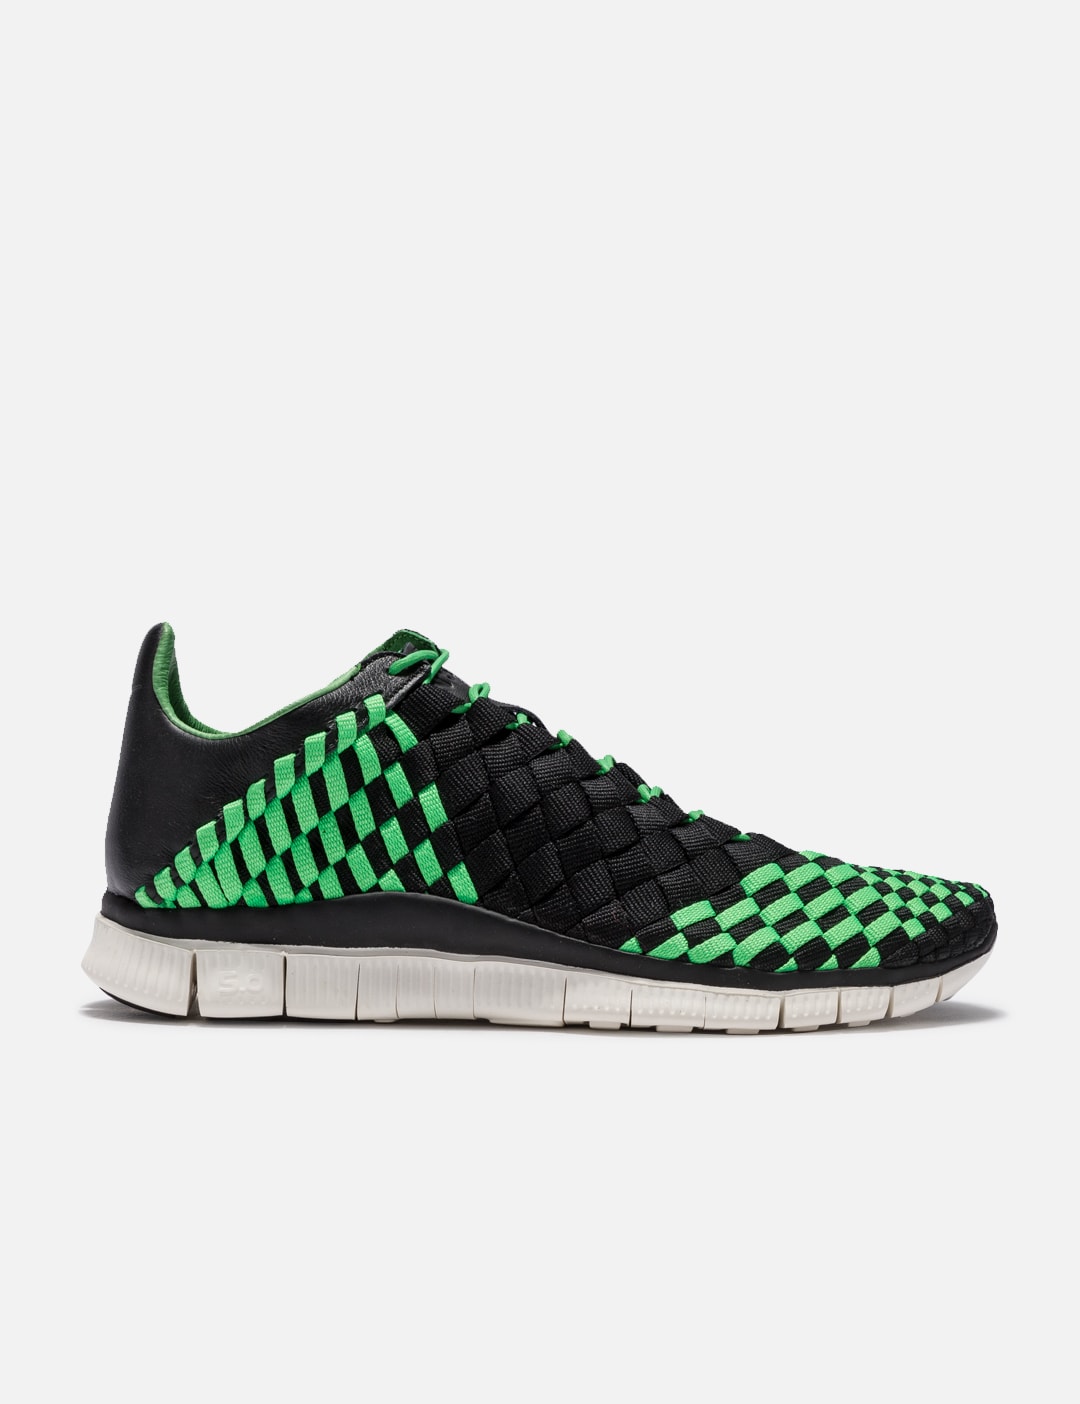 - NIKE FREE INNEVA WOVEN | HBX - Globally Curated Fashion and Lifestyle by Hypebeast